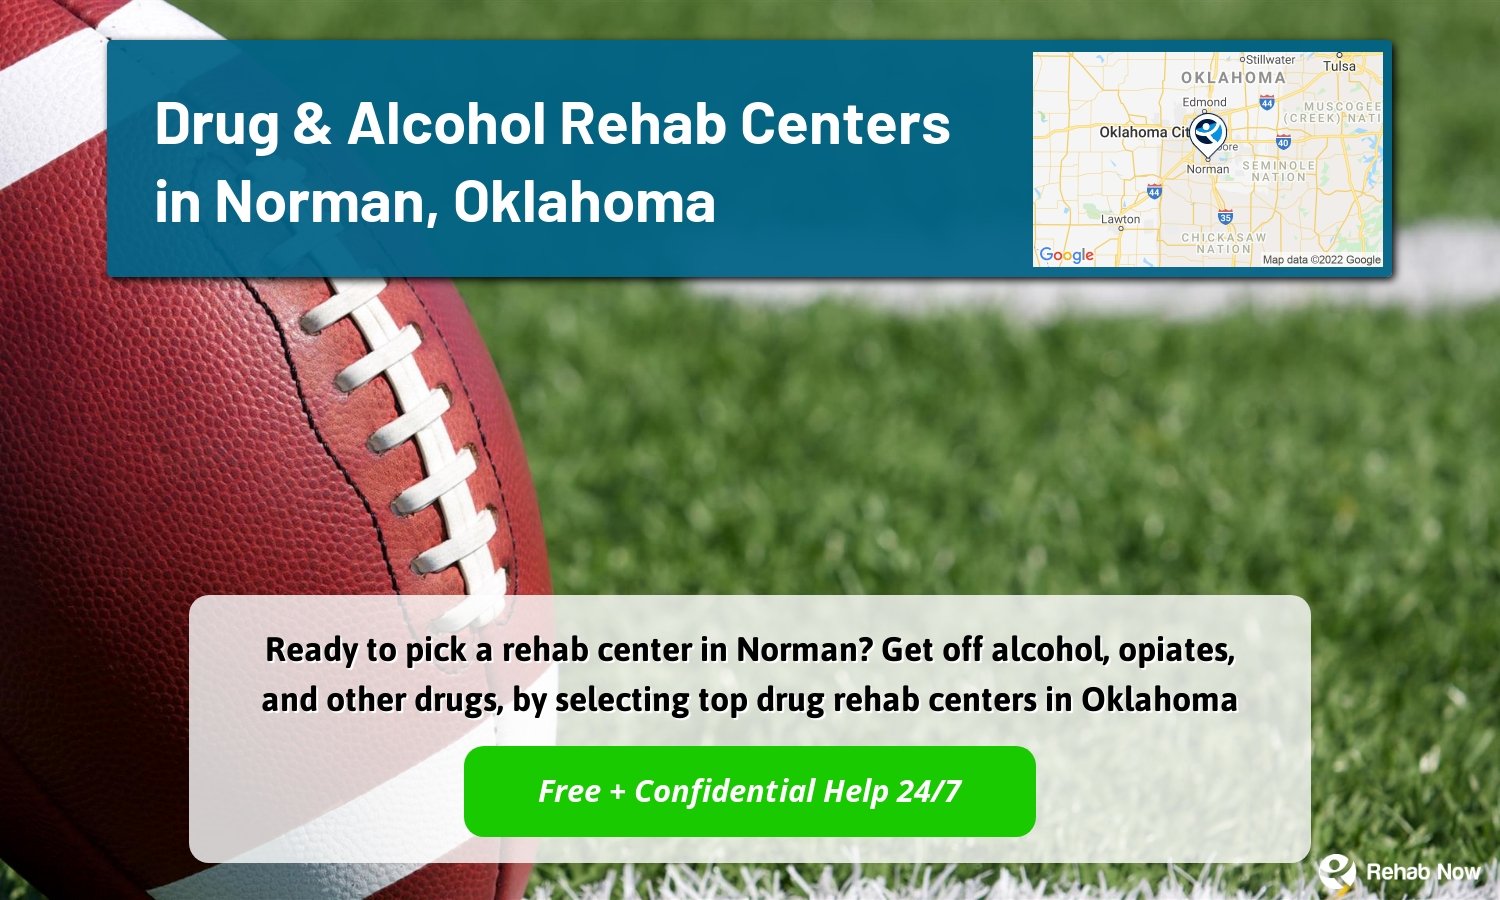 Ready to pick a rehab center in Norman? Get off alcohol, opiates, and other drugs, by selecting top drug rehab centers in Oklahoma